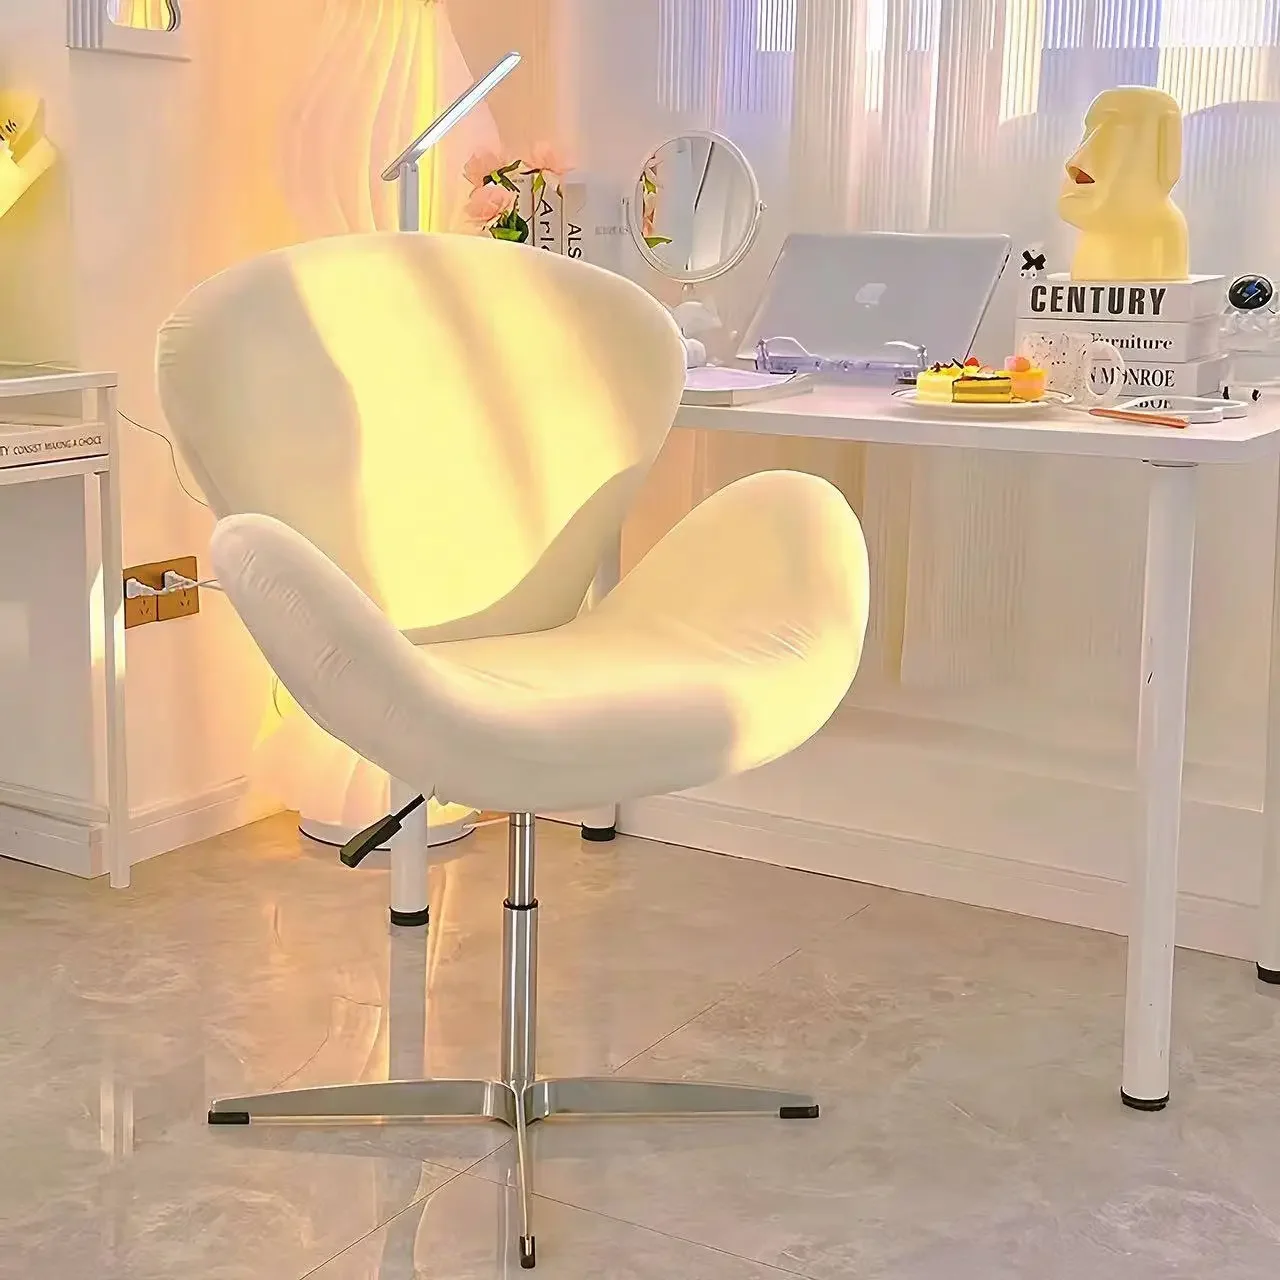 New Computer Chair, Home Bedroom Girls Makeup Chair, Comfortable Sedentary Dressing Table Stool, Sherpa Lift Swivel Chair